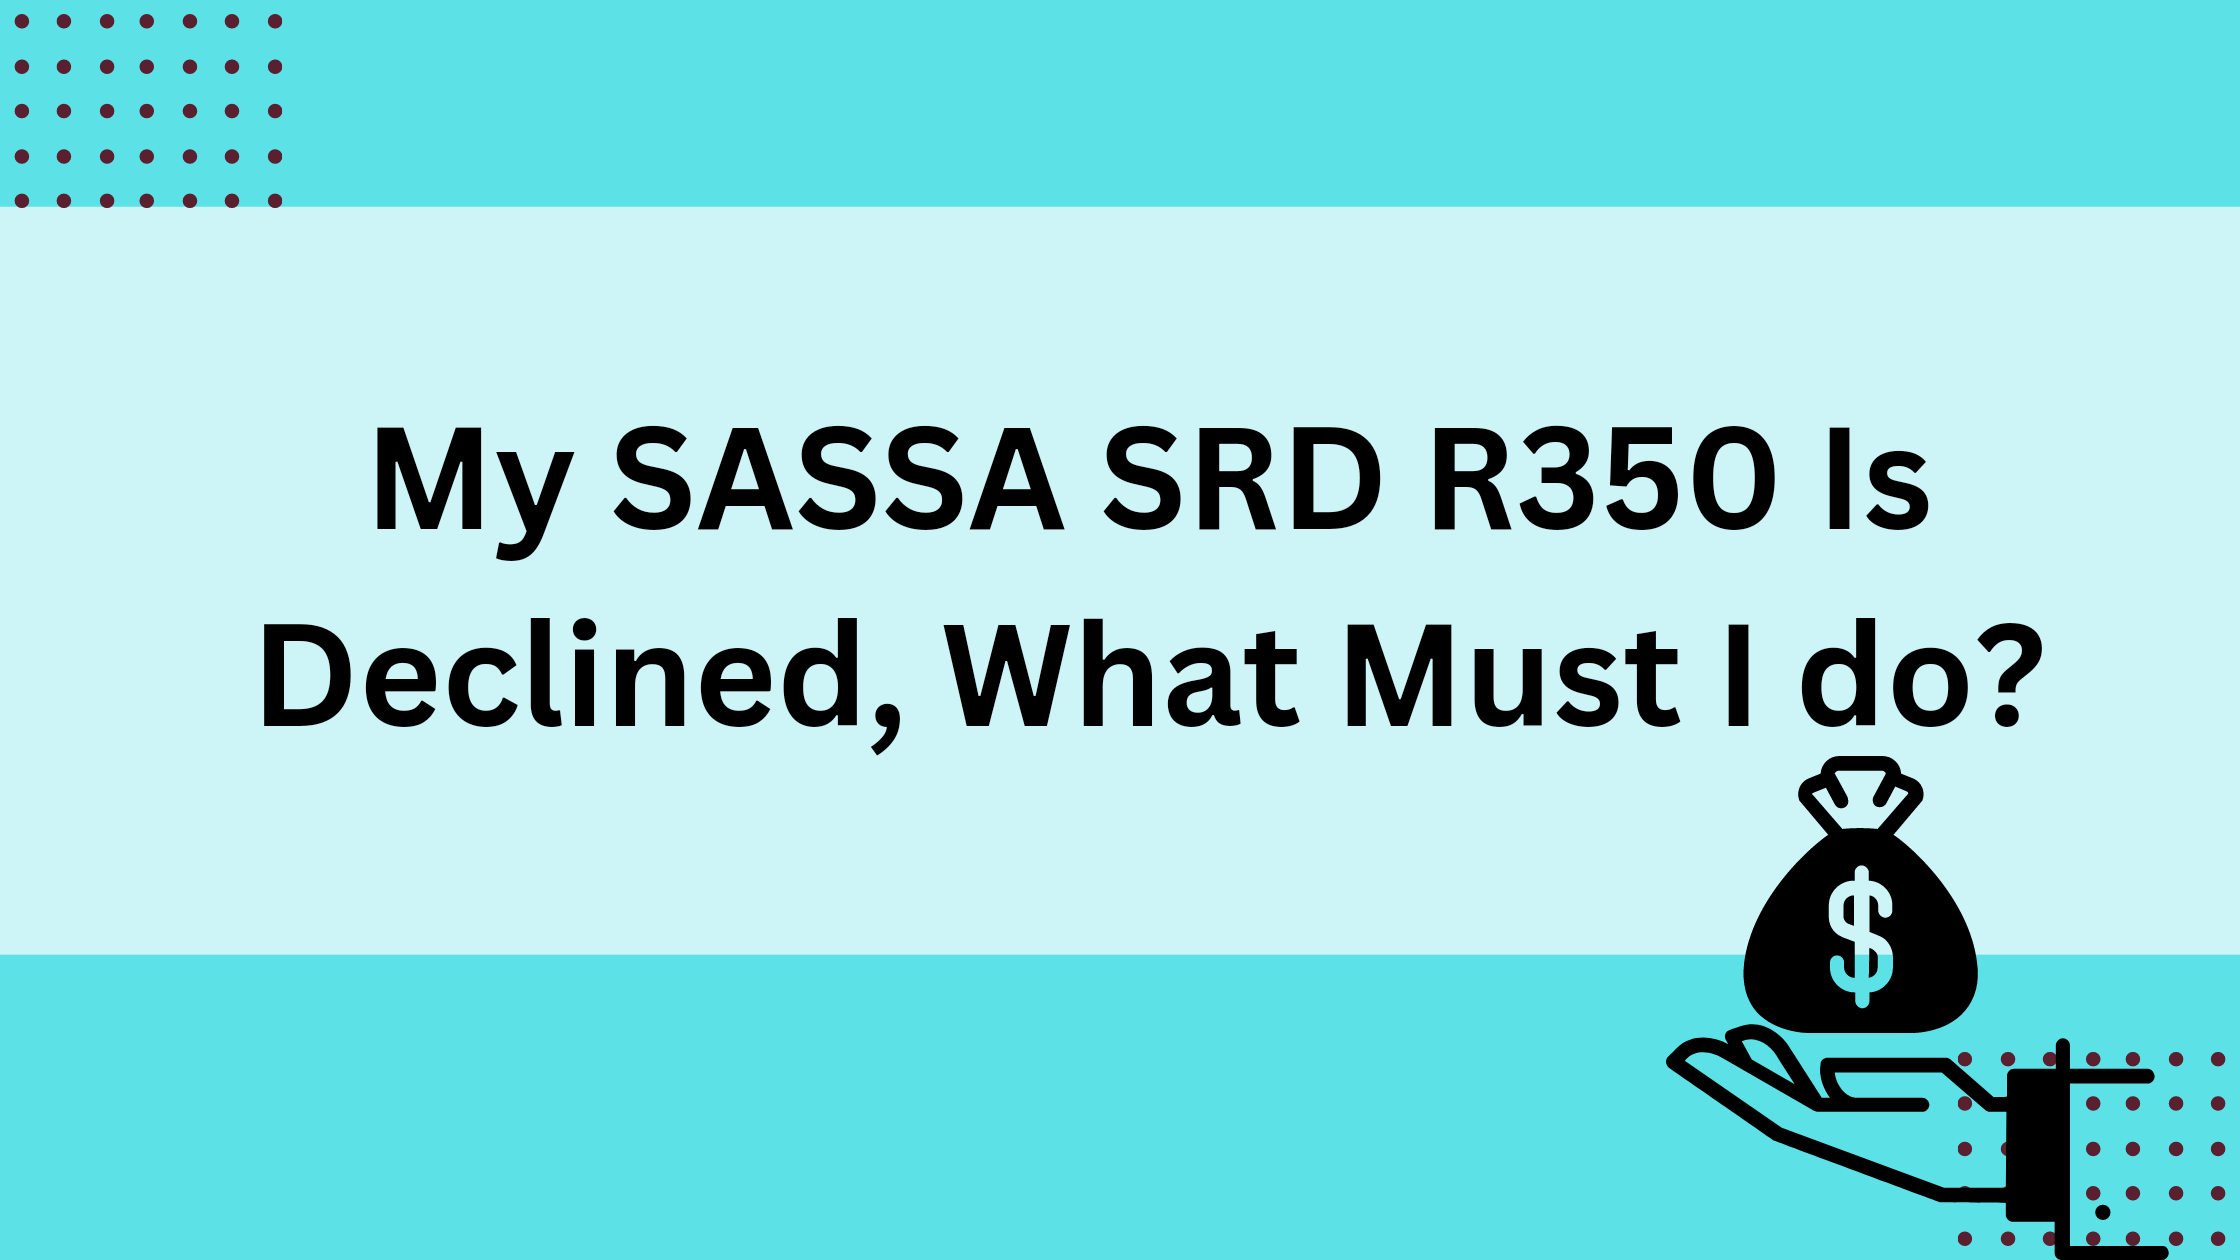 My SASSA SRD R350 Is Declined, What Must I do?